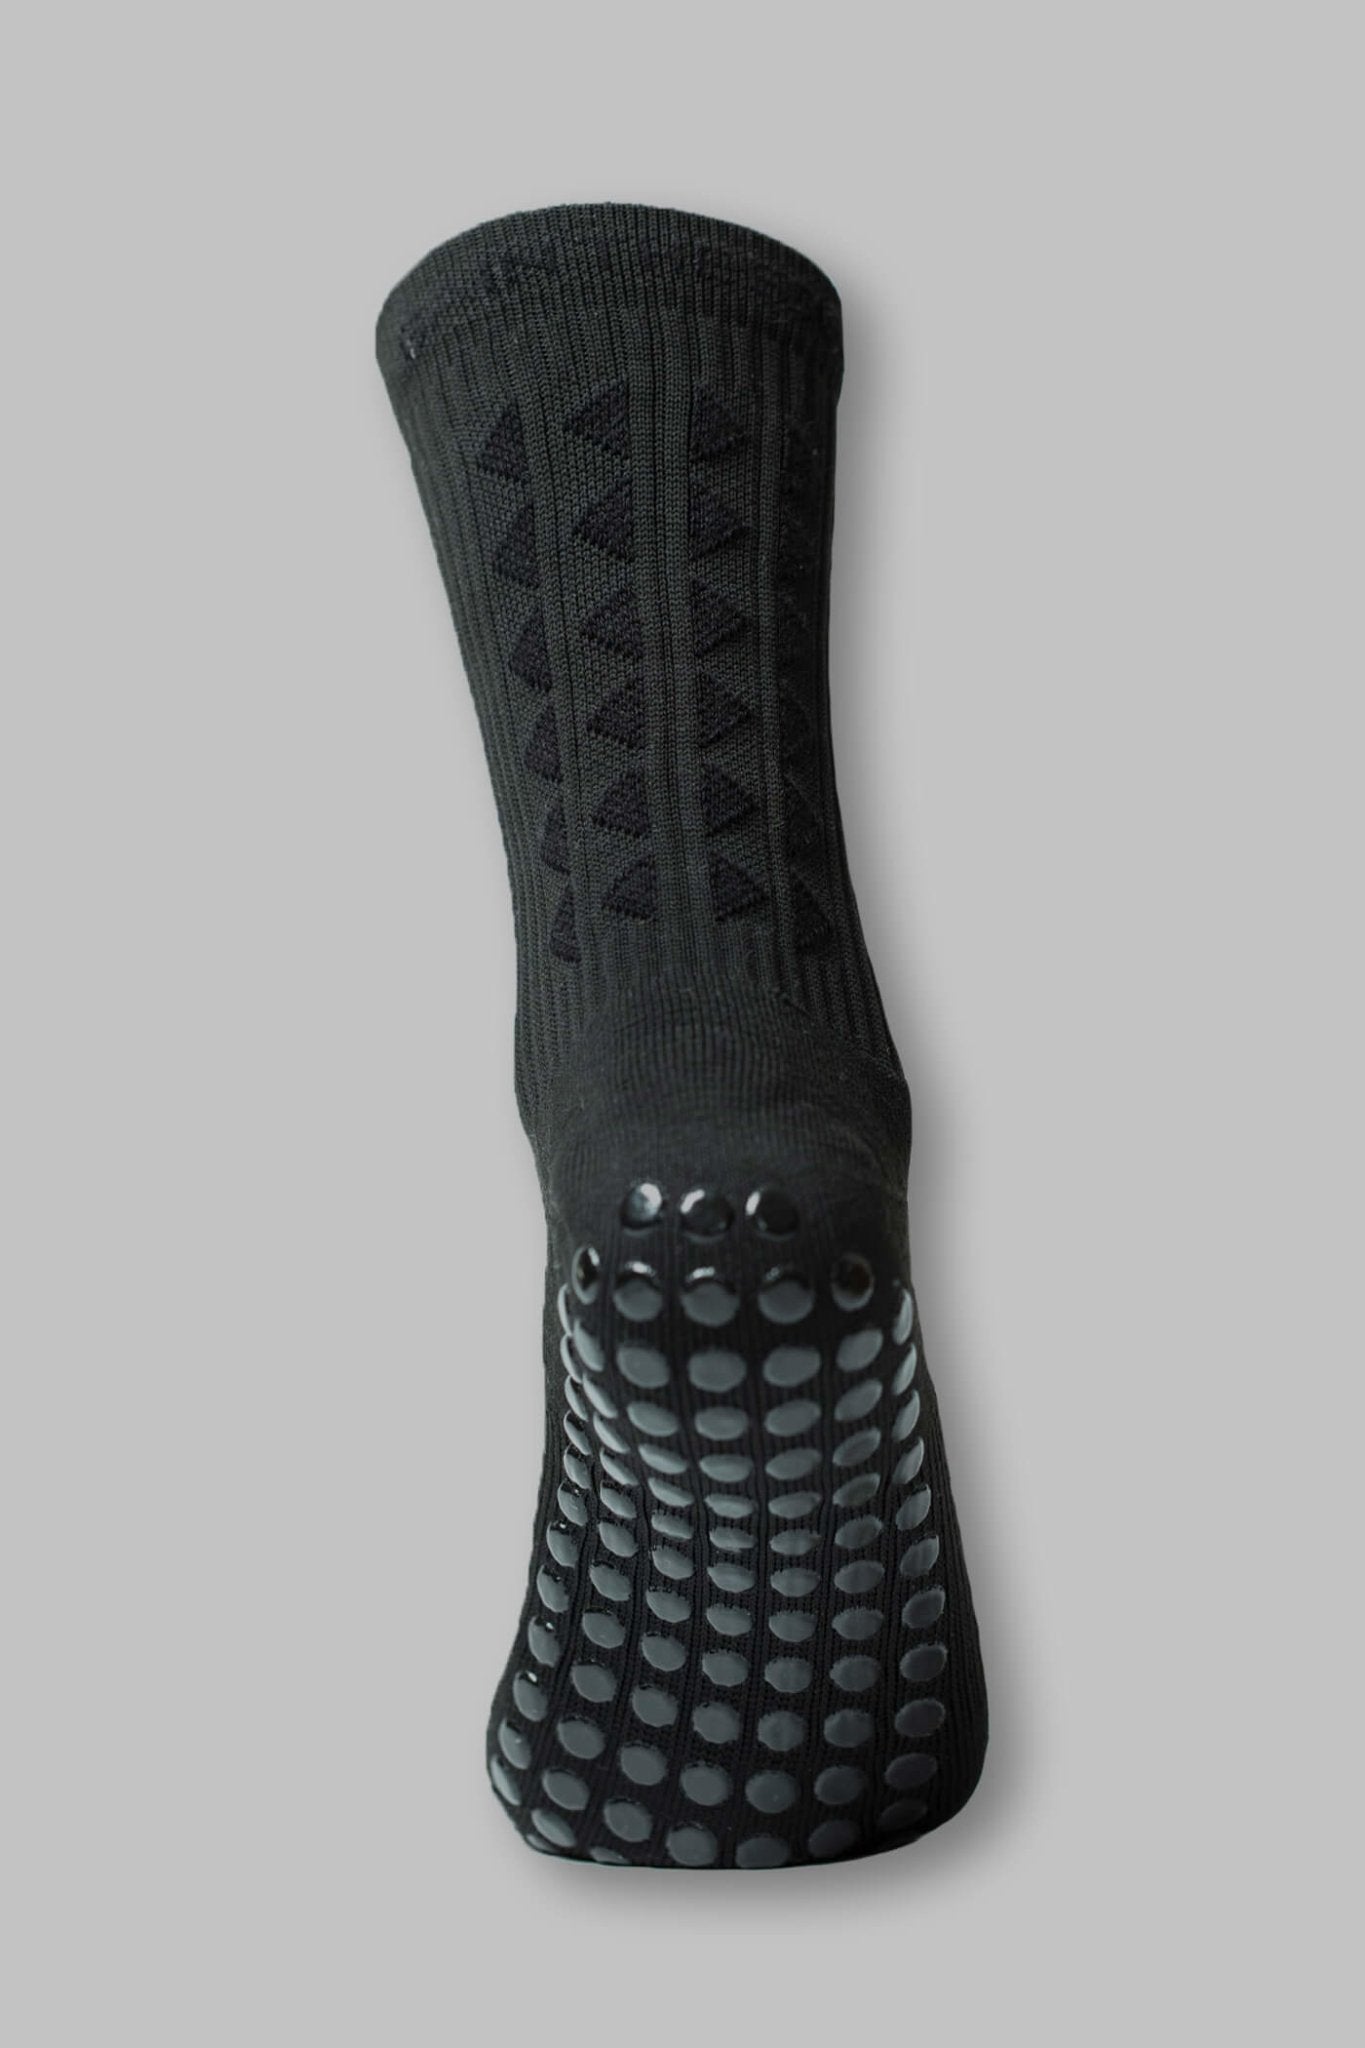 BLACKOUT LIMITED EDITION GRIP SOCKS 2.0 - Gain The Edge US